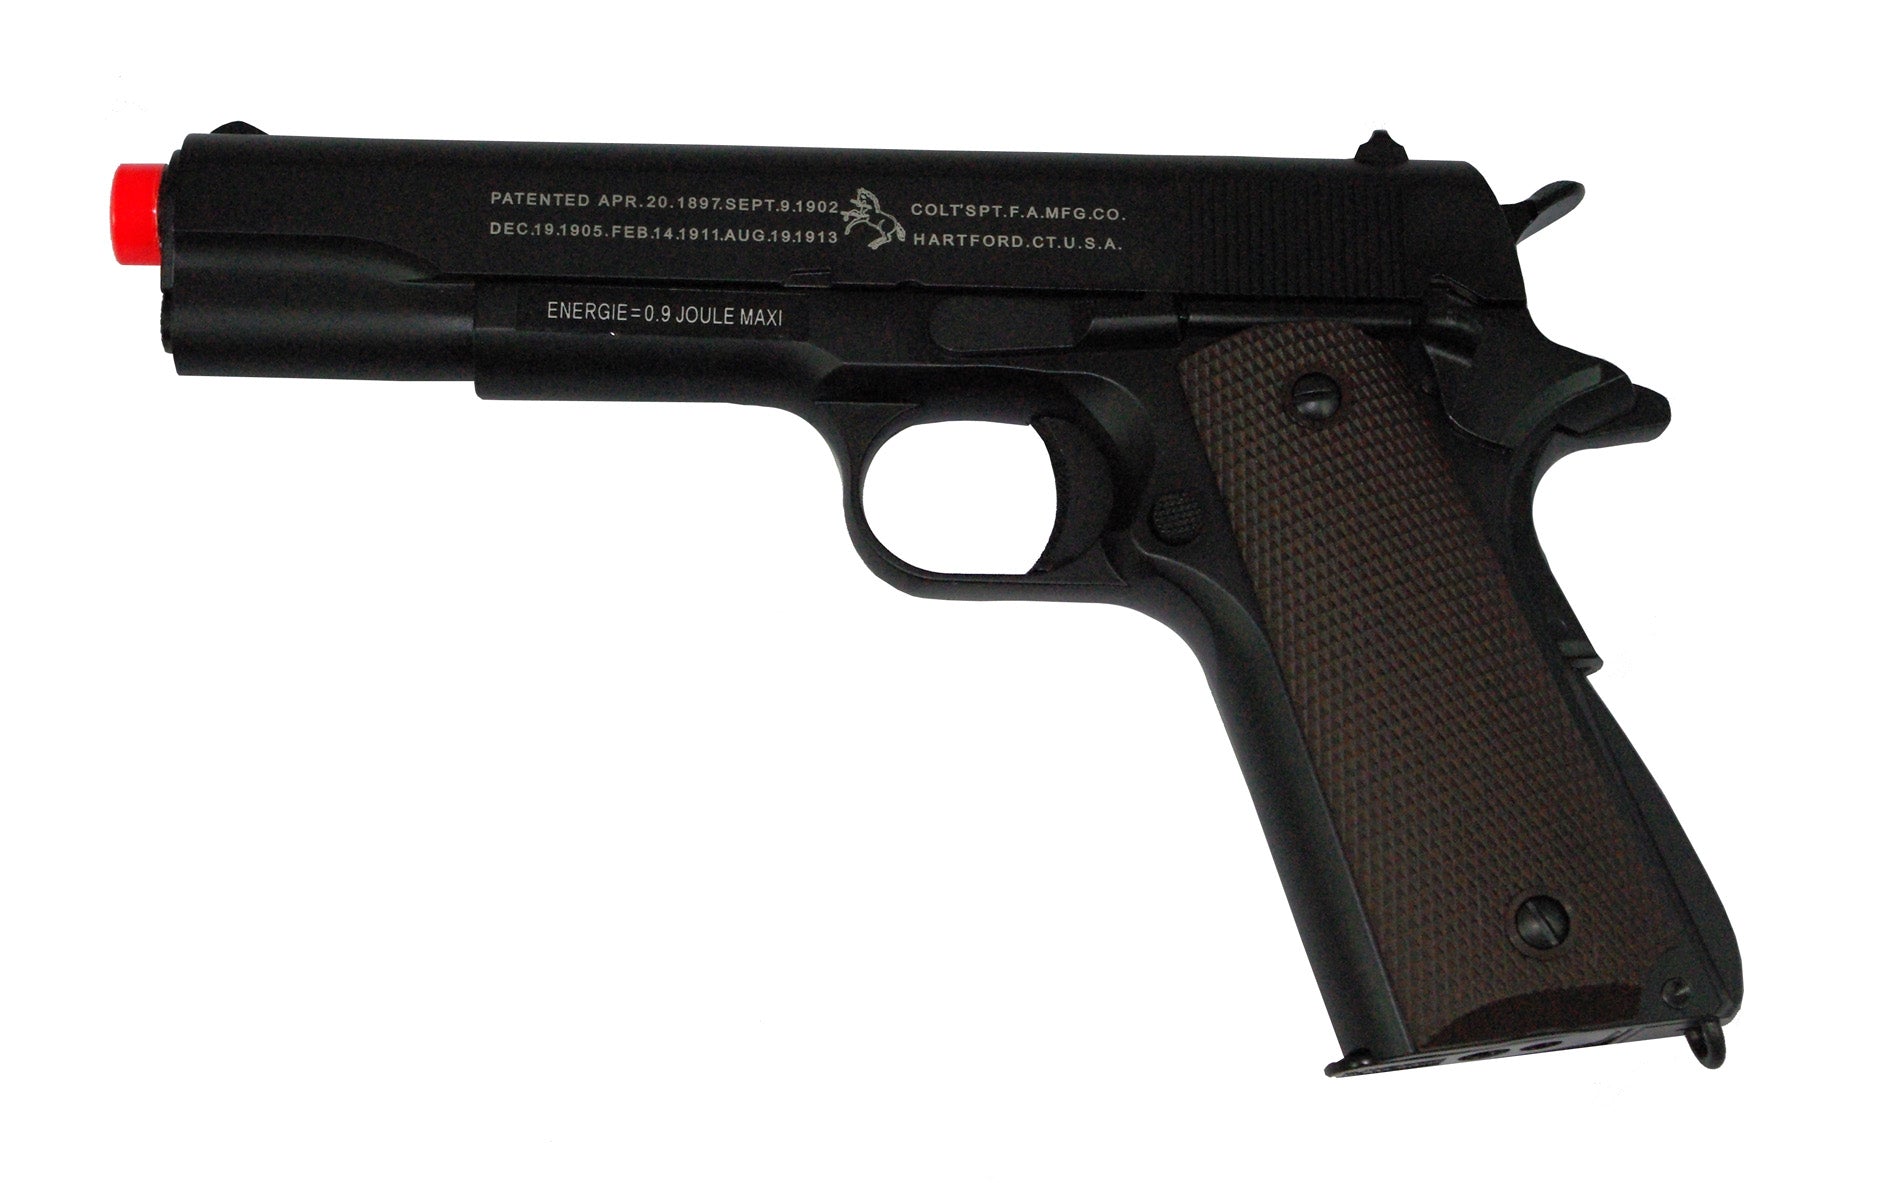 Colt M1911 Full Metal GBB (Armored Works) as a first Handgun? Any